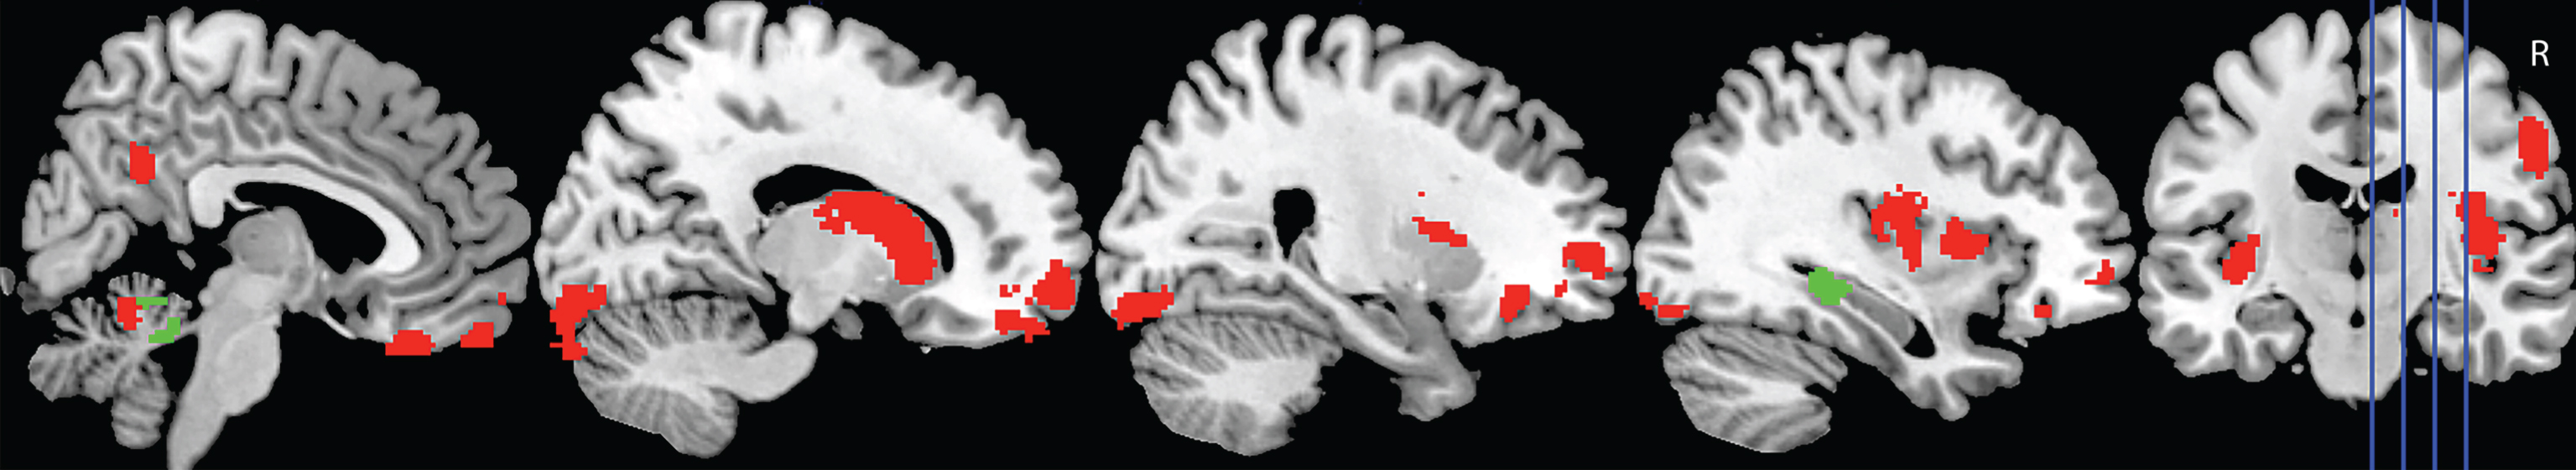 Voxel-based morphometry covariate analyses showing brain regions which correlate significantly with task performance in AD (green) and bvFTD (red). Colored voxels show regions that were significant in the analyses at p < 0.001 uncorrected. All clusters reported t > 3.3. Education is included as a covariate in all analyses. R, right. For full description of clusters and relevant coordinates, please refer to Table 3.